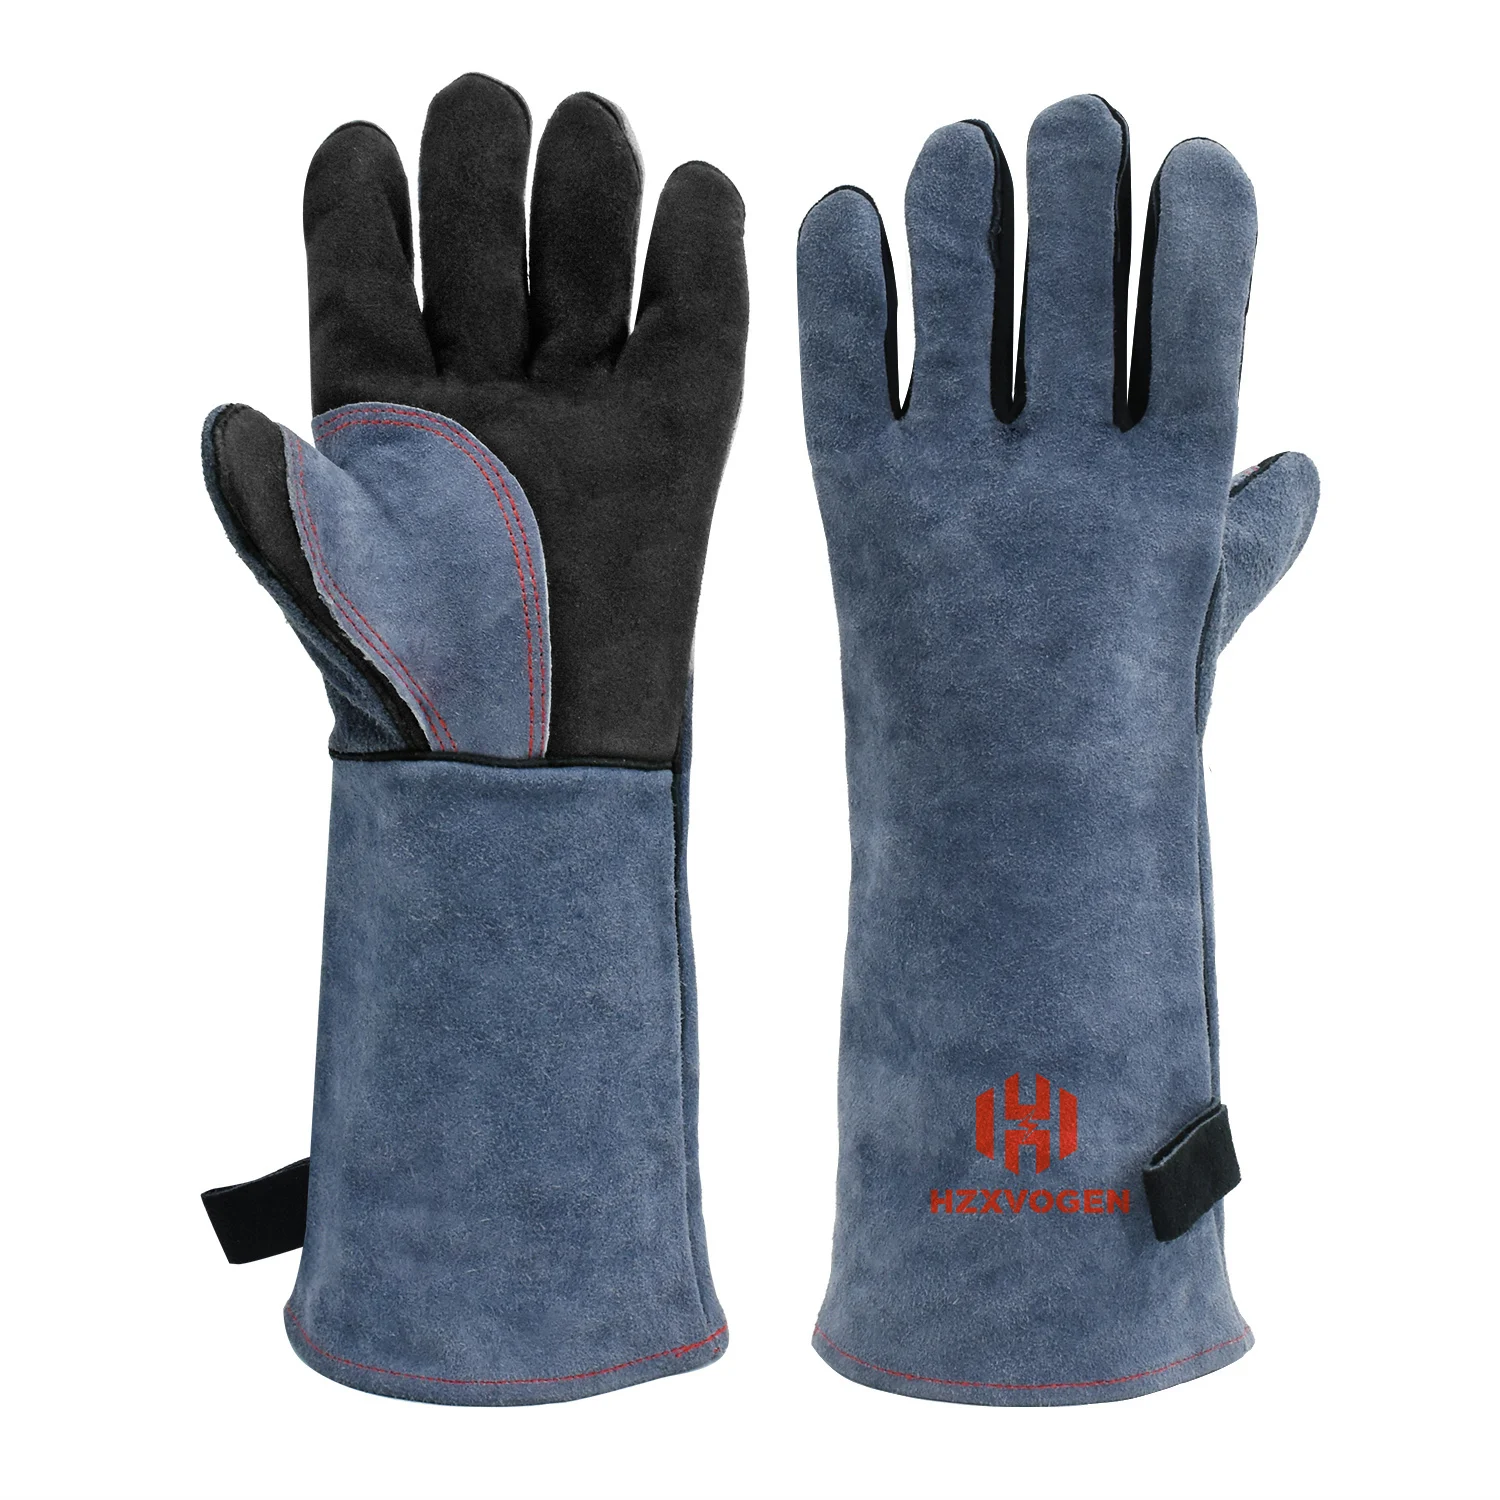 Premium Leather for Welding Large Wood Stove or Fireplace Cooking Weld Gloves Tig Fireproof Heat Resistant Kevlar